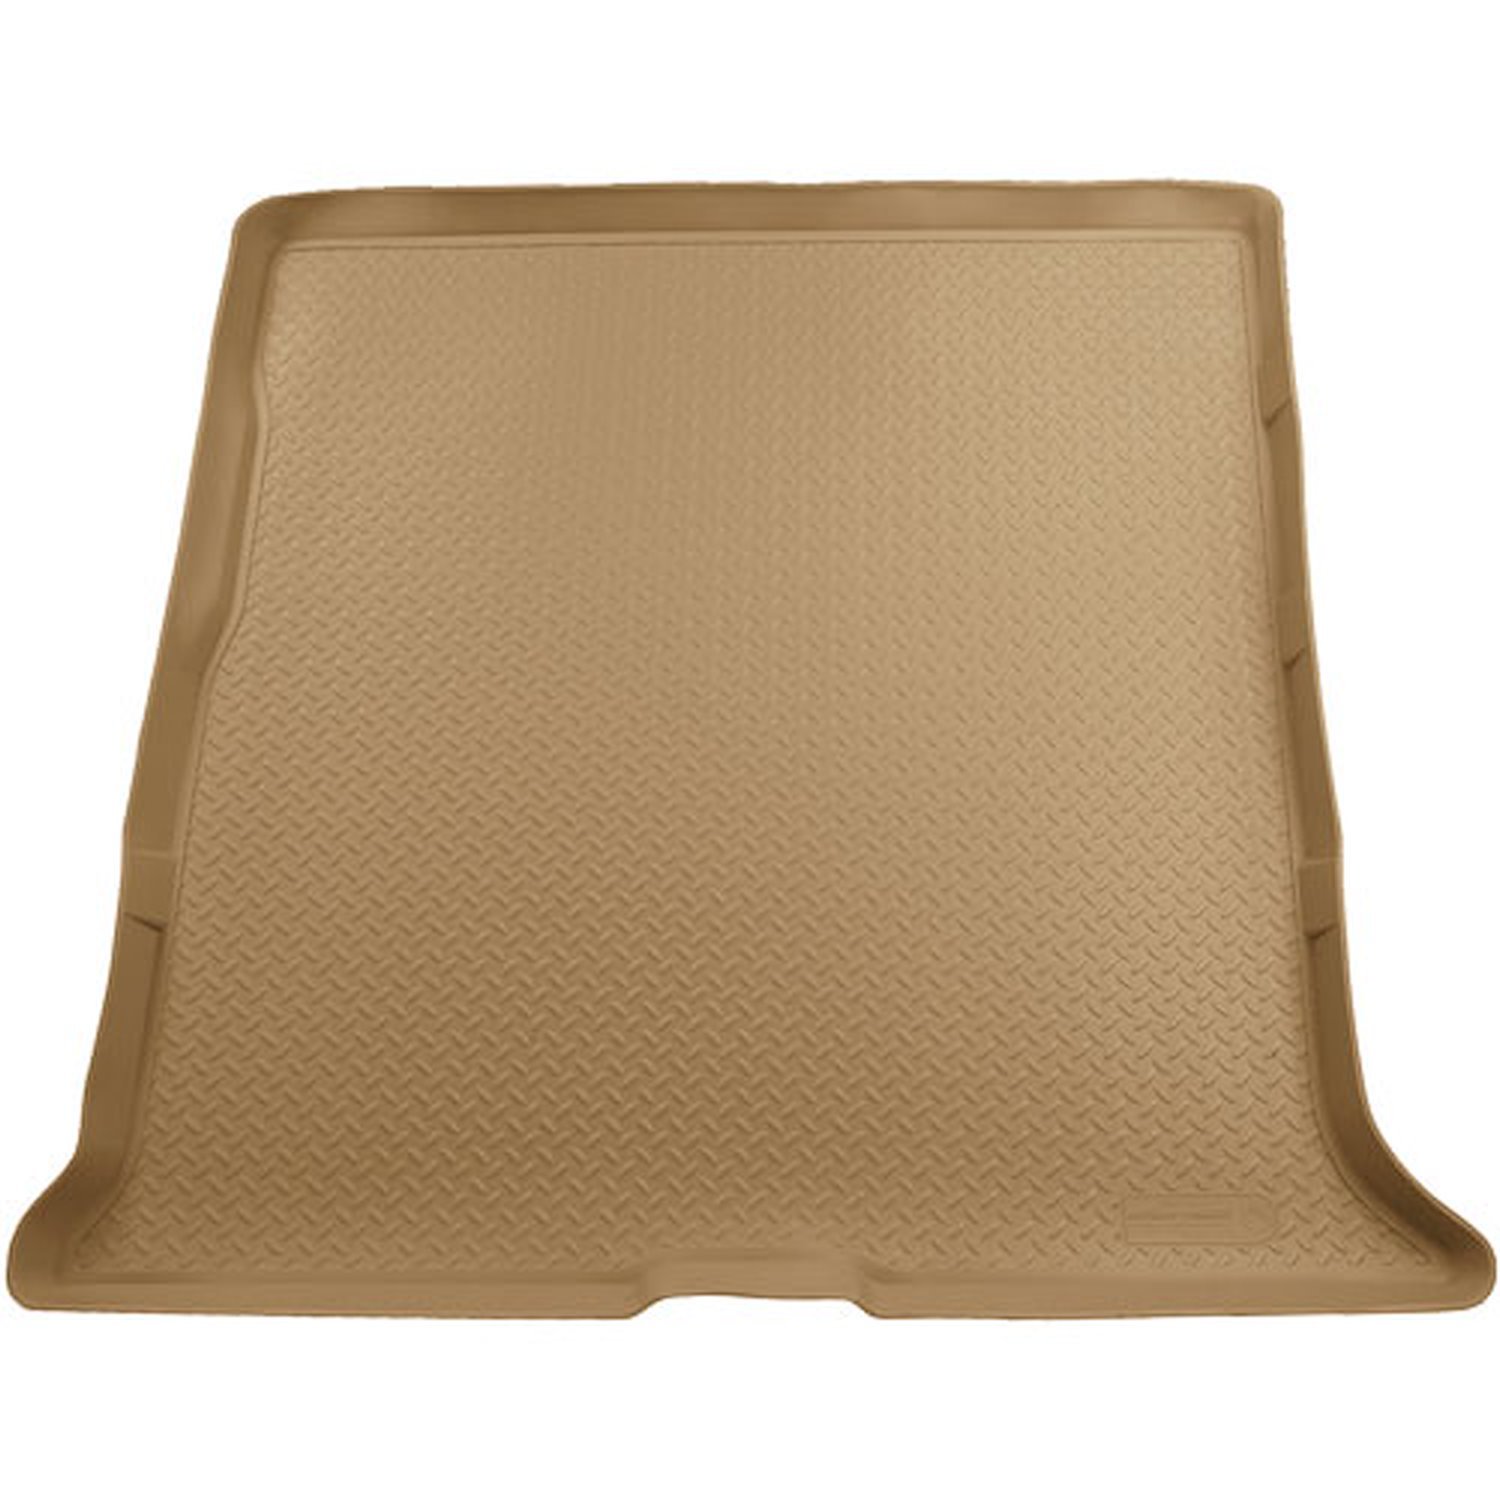 Classic Style Cargo Area Liner 2002-2010 Ford Explorer